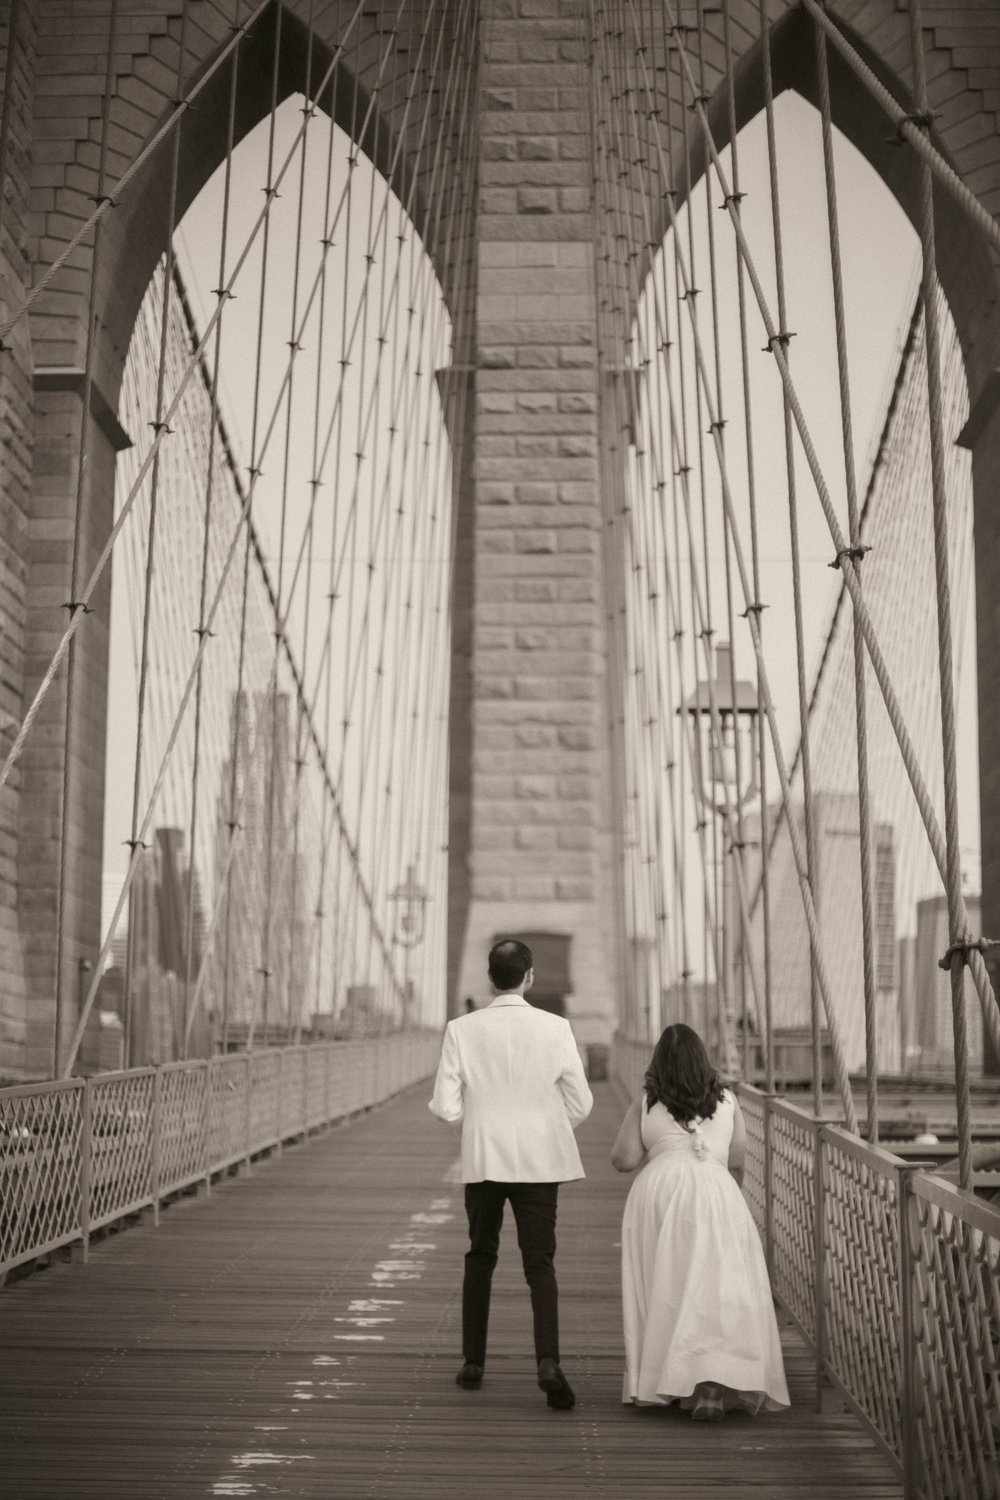 Seamless NYC elopement experience: our package includes a photographer &amp; officiant showcasing the city's romantic backdrop.